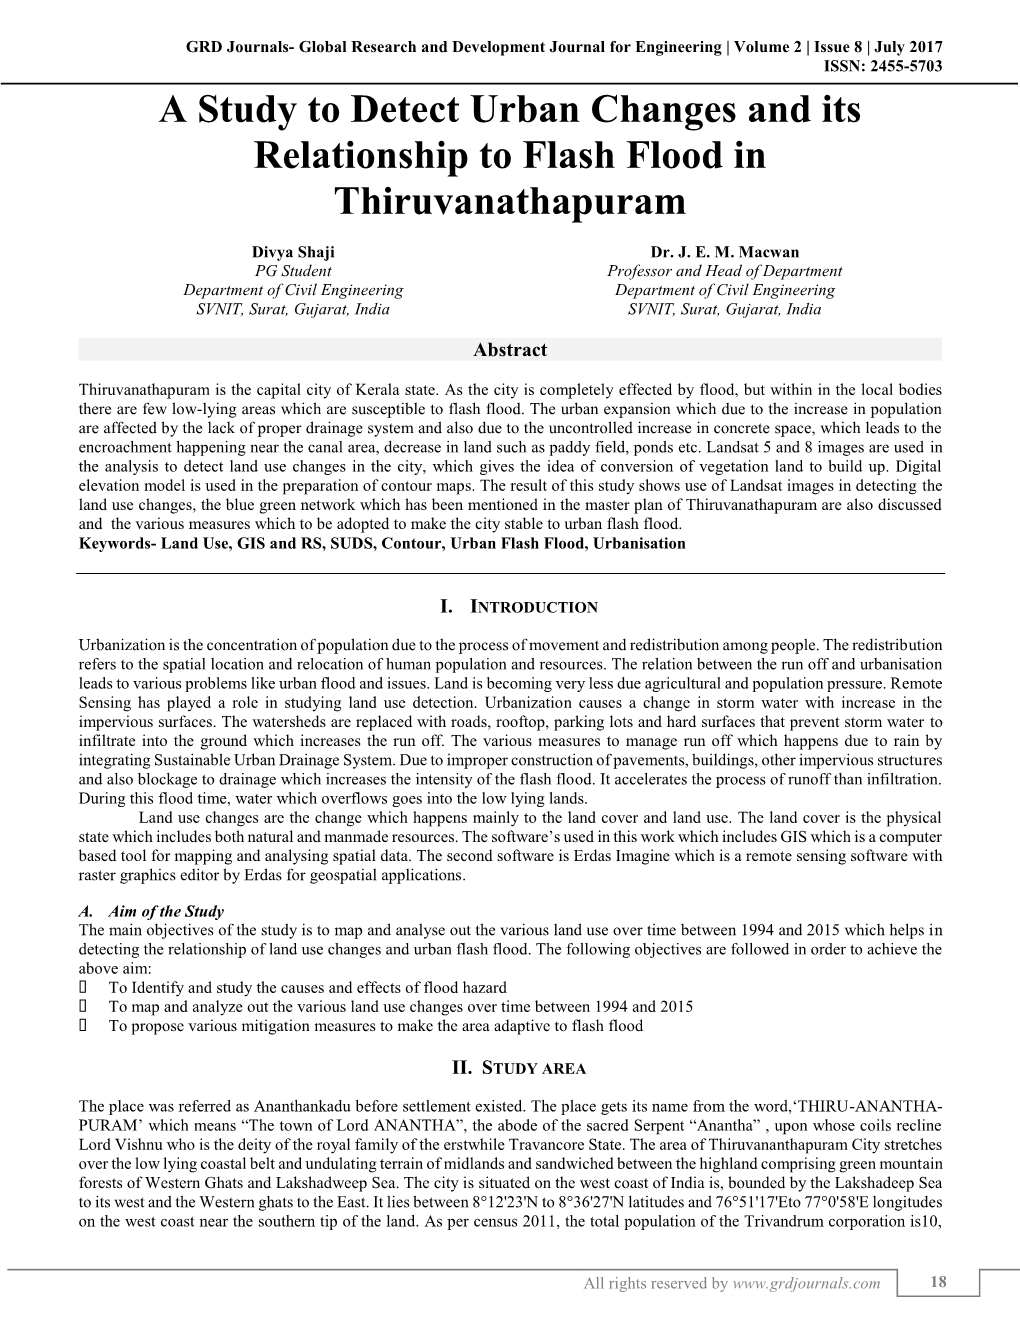 A Study to Detect Urban Changes and Its Relationship to Flash Flood in Thiruvanathapuram